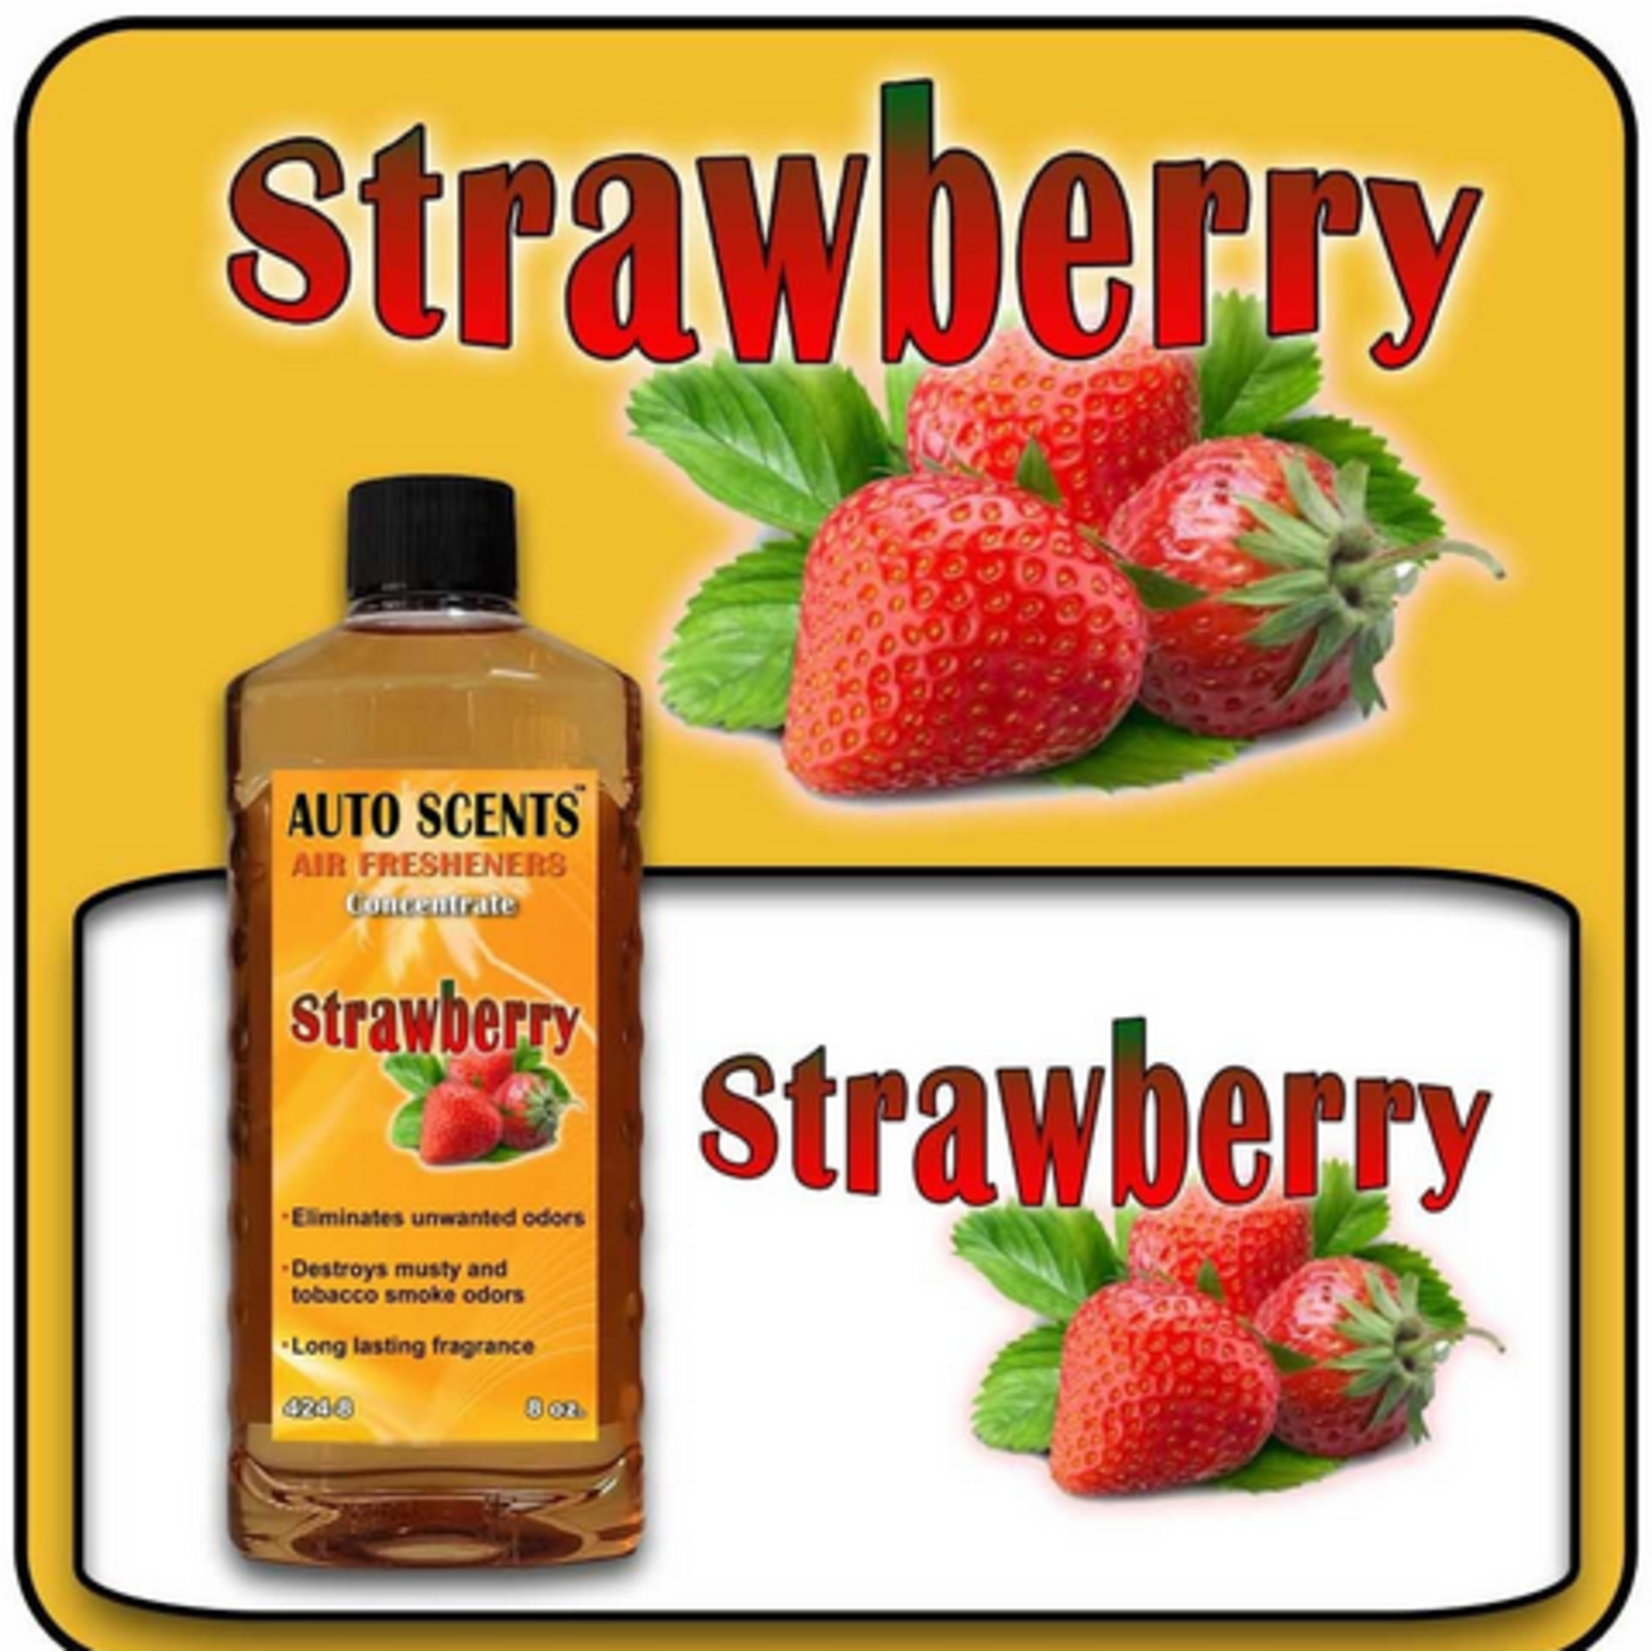 Auto Scents Auto Scents Air Fresheners - Strawberry 2X Concentrate